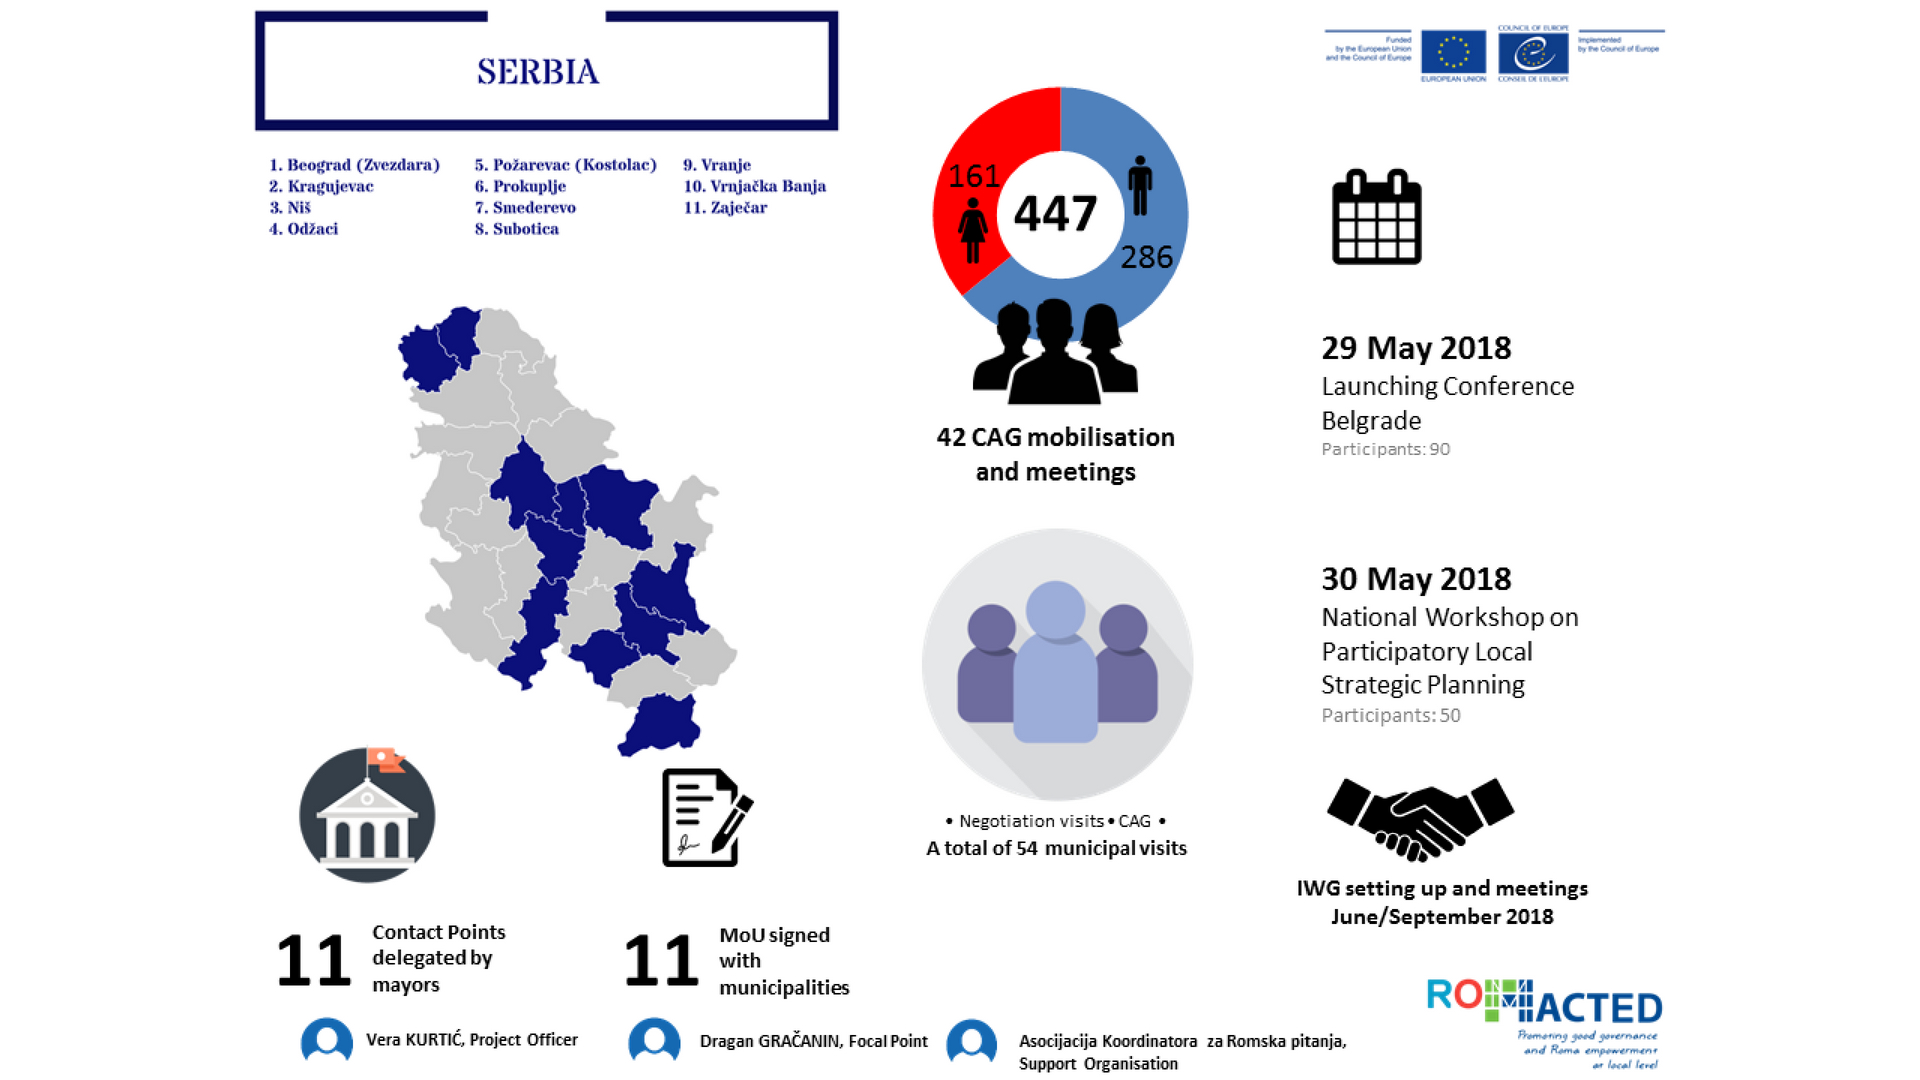 Info graphic summarizes developments of the first six-month implementation in 2018 in Serbia.